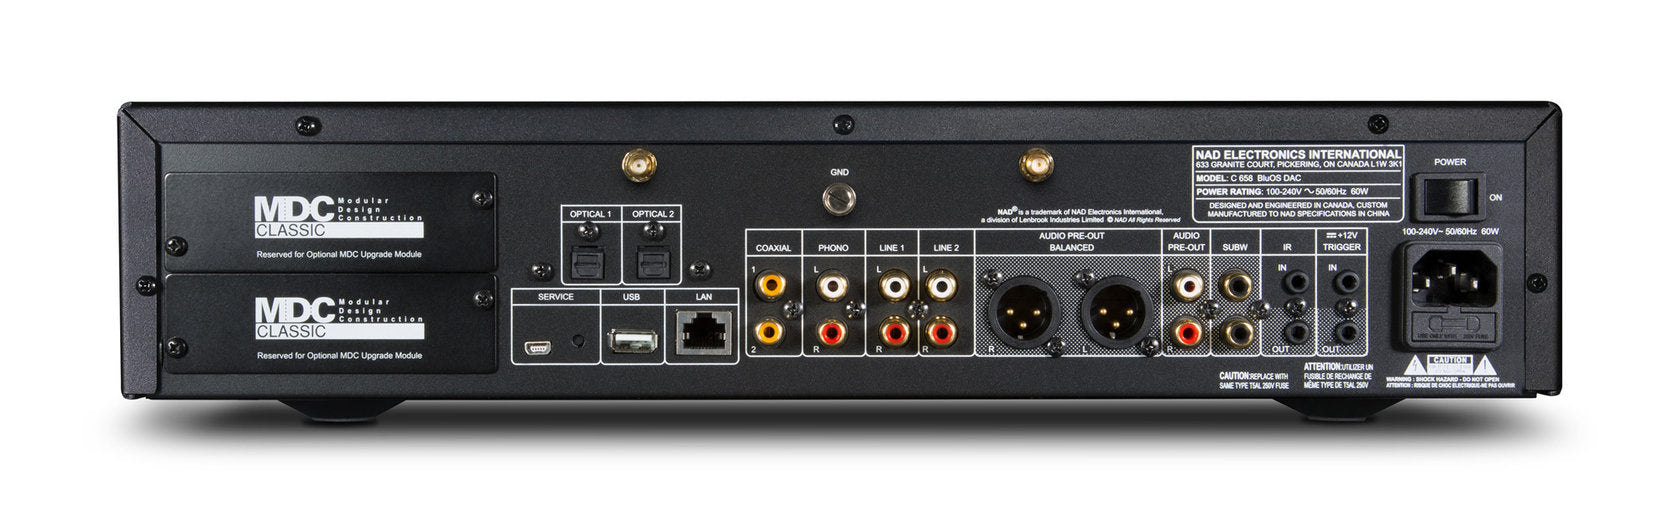 NAD C658 BluOs network player - preamplifier - DAC